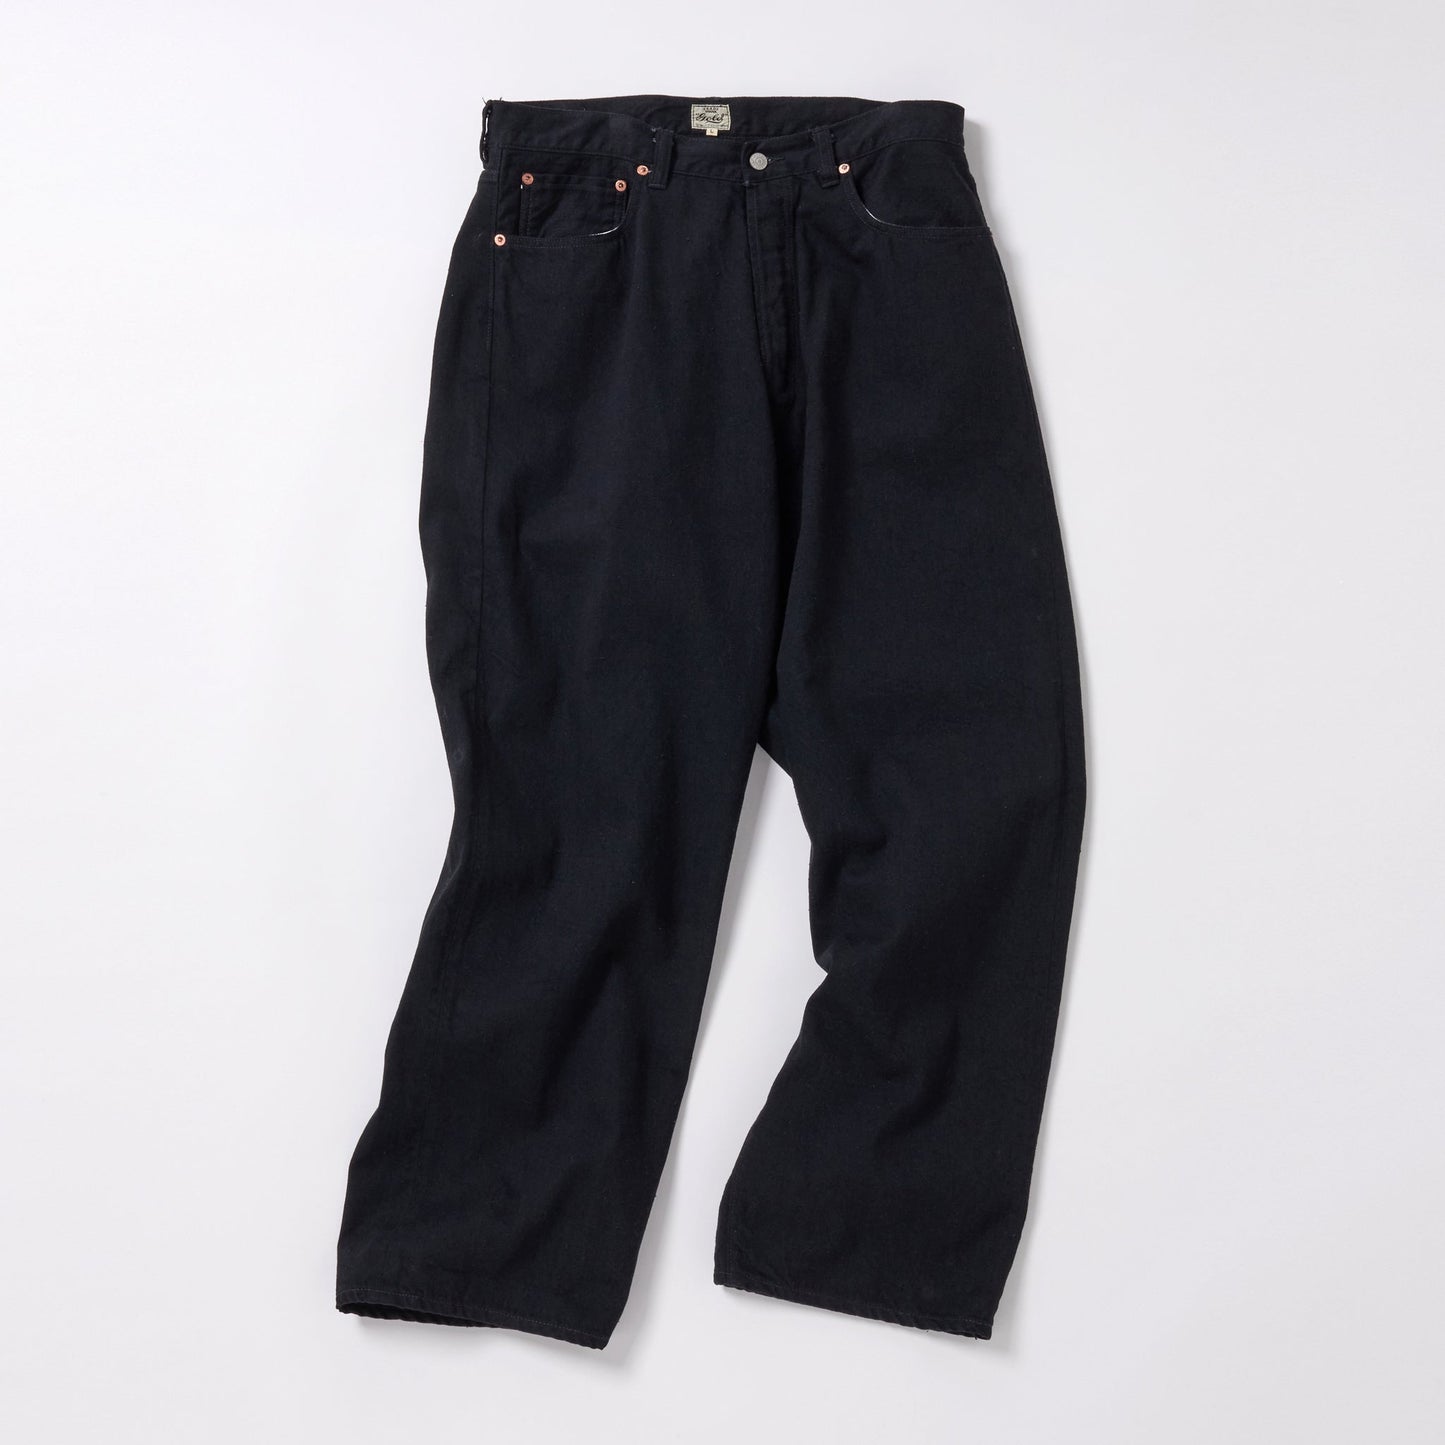 GL42427A / RECYCLED WASTE SUVIN COTTON YARN 11.5oz. DENIM 5POCKET WIDE PANTS